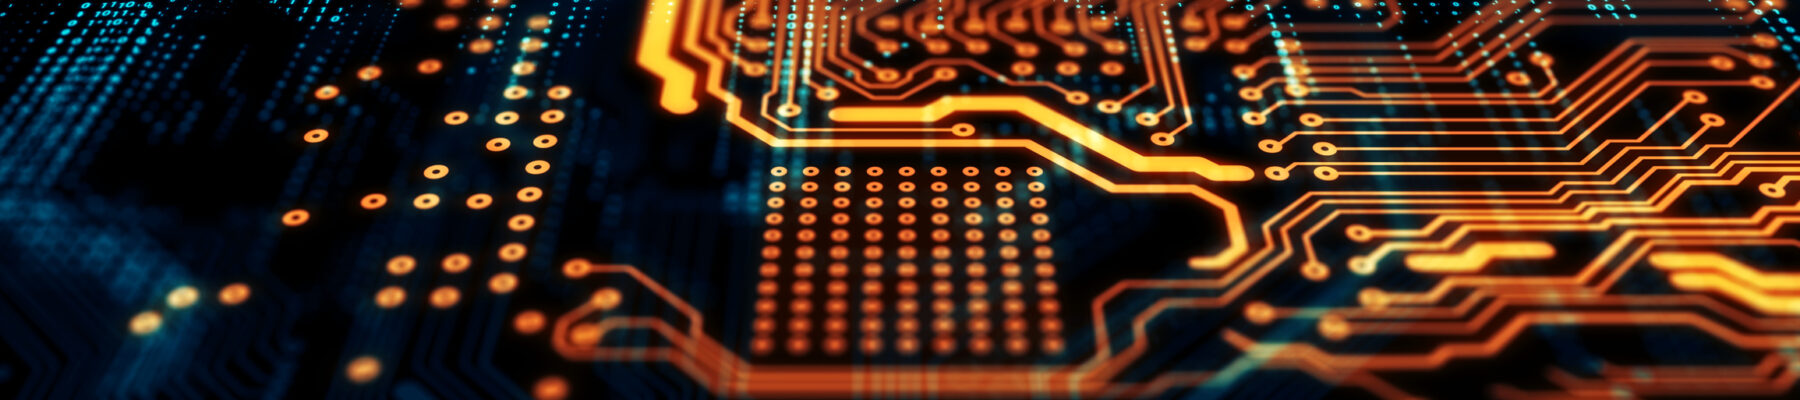 Technology background of the abstract computer motherboard, can be used in the description of technological processes, science, education. Can be used as digital dynamic wallpaper. 3d rendering